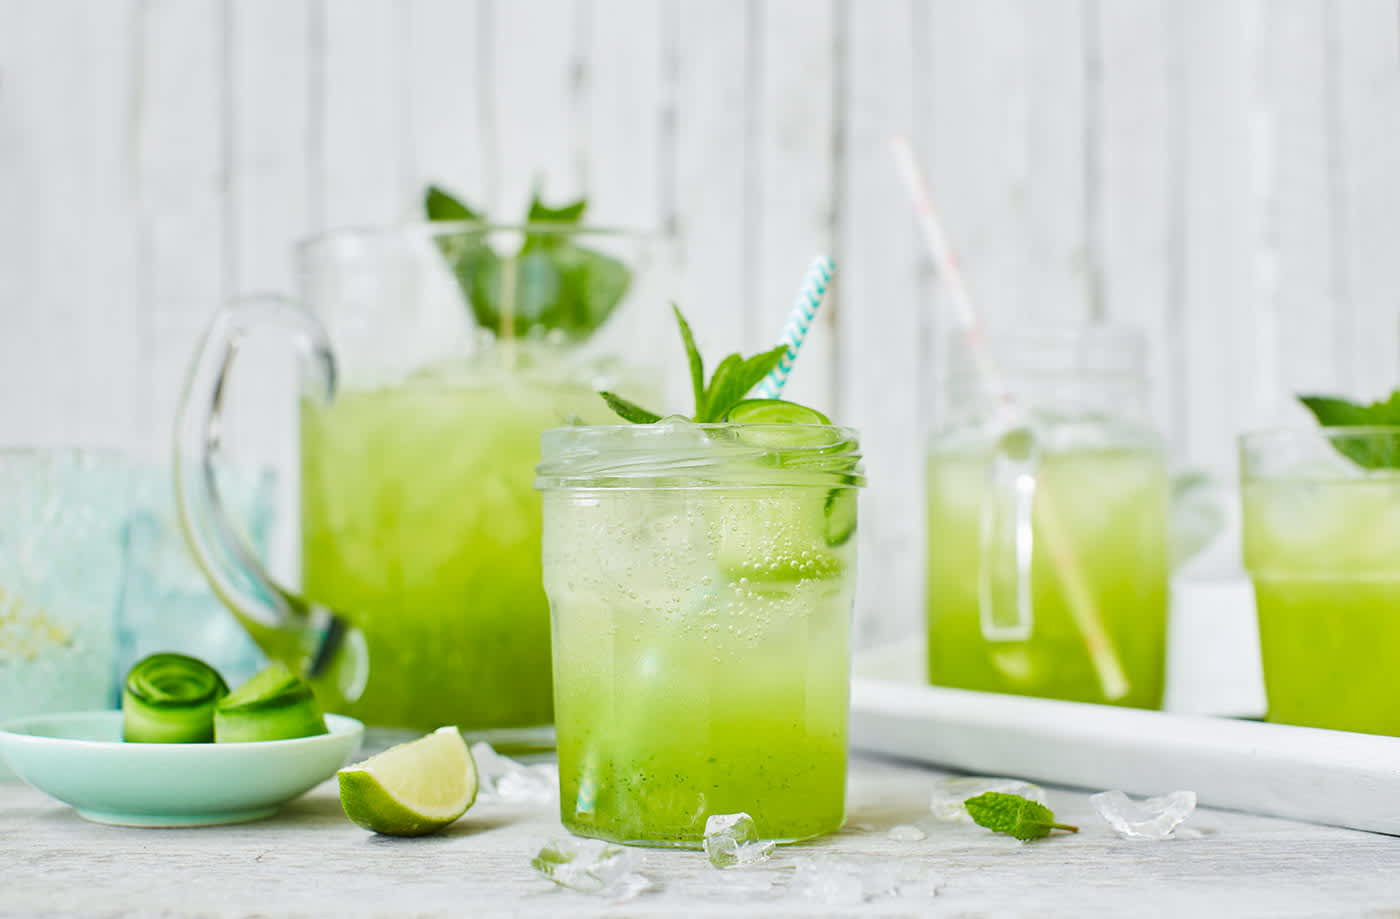 Glass & pitcher full of cucumber, lime & elderflower cooler garnished with mint and lime